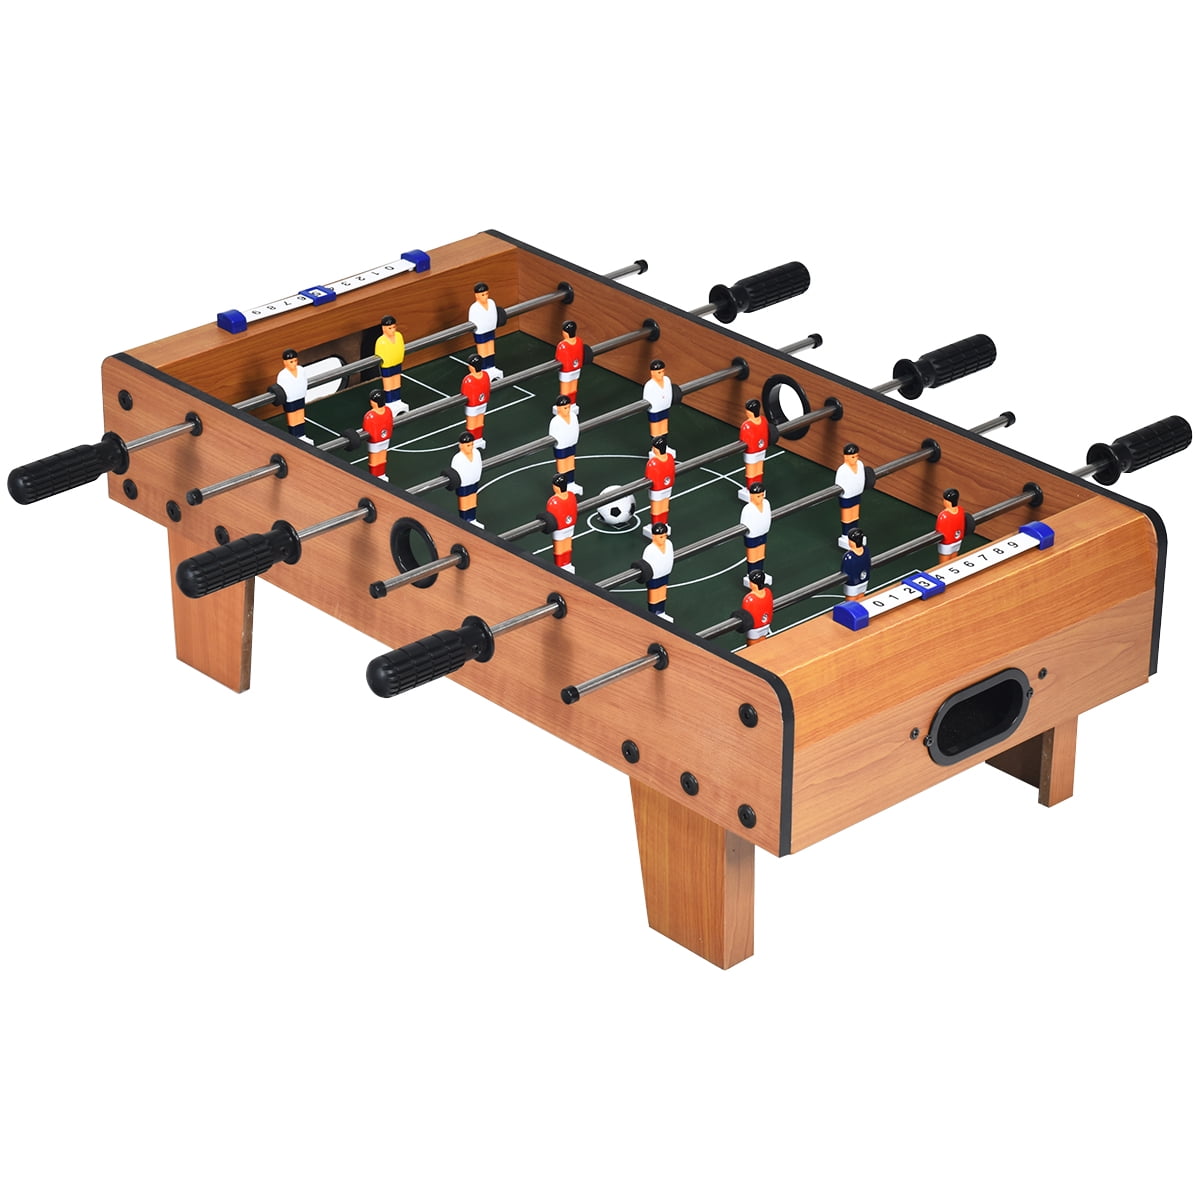 27 "CLASSIC TABLE FOOTBALL DELUXE FREE STANDING FAMILY SOCCER GAME GAMBE IN LEGNO 